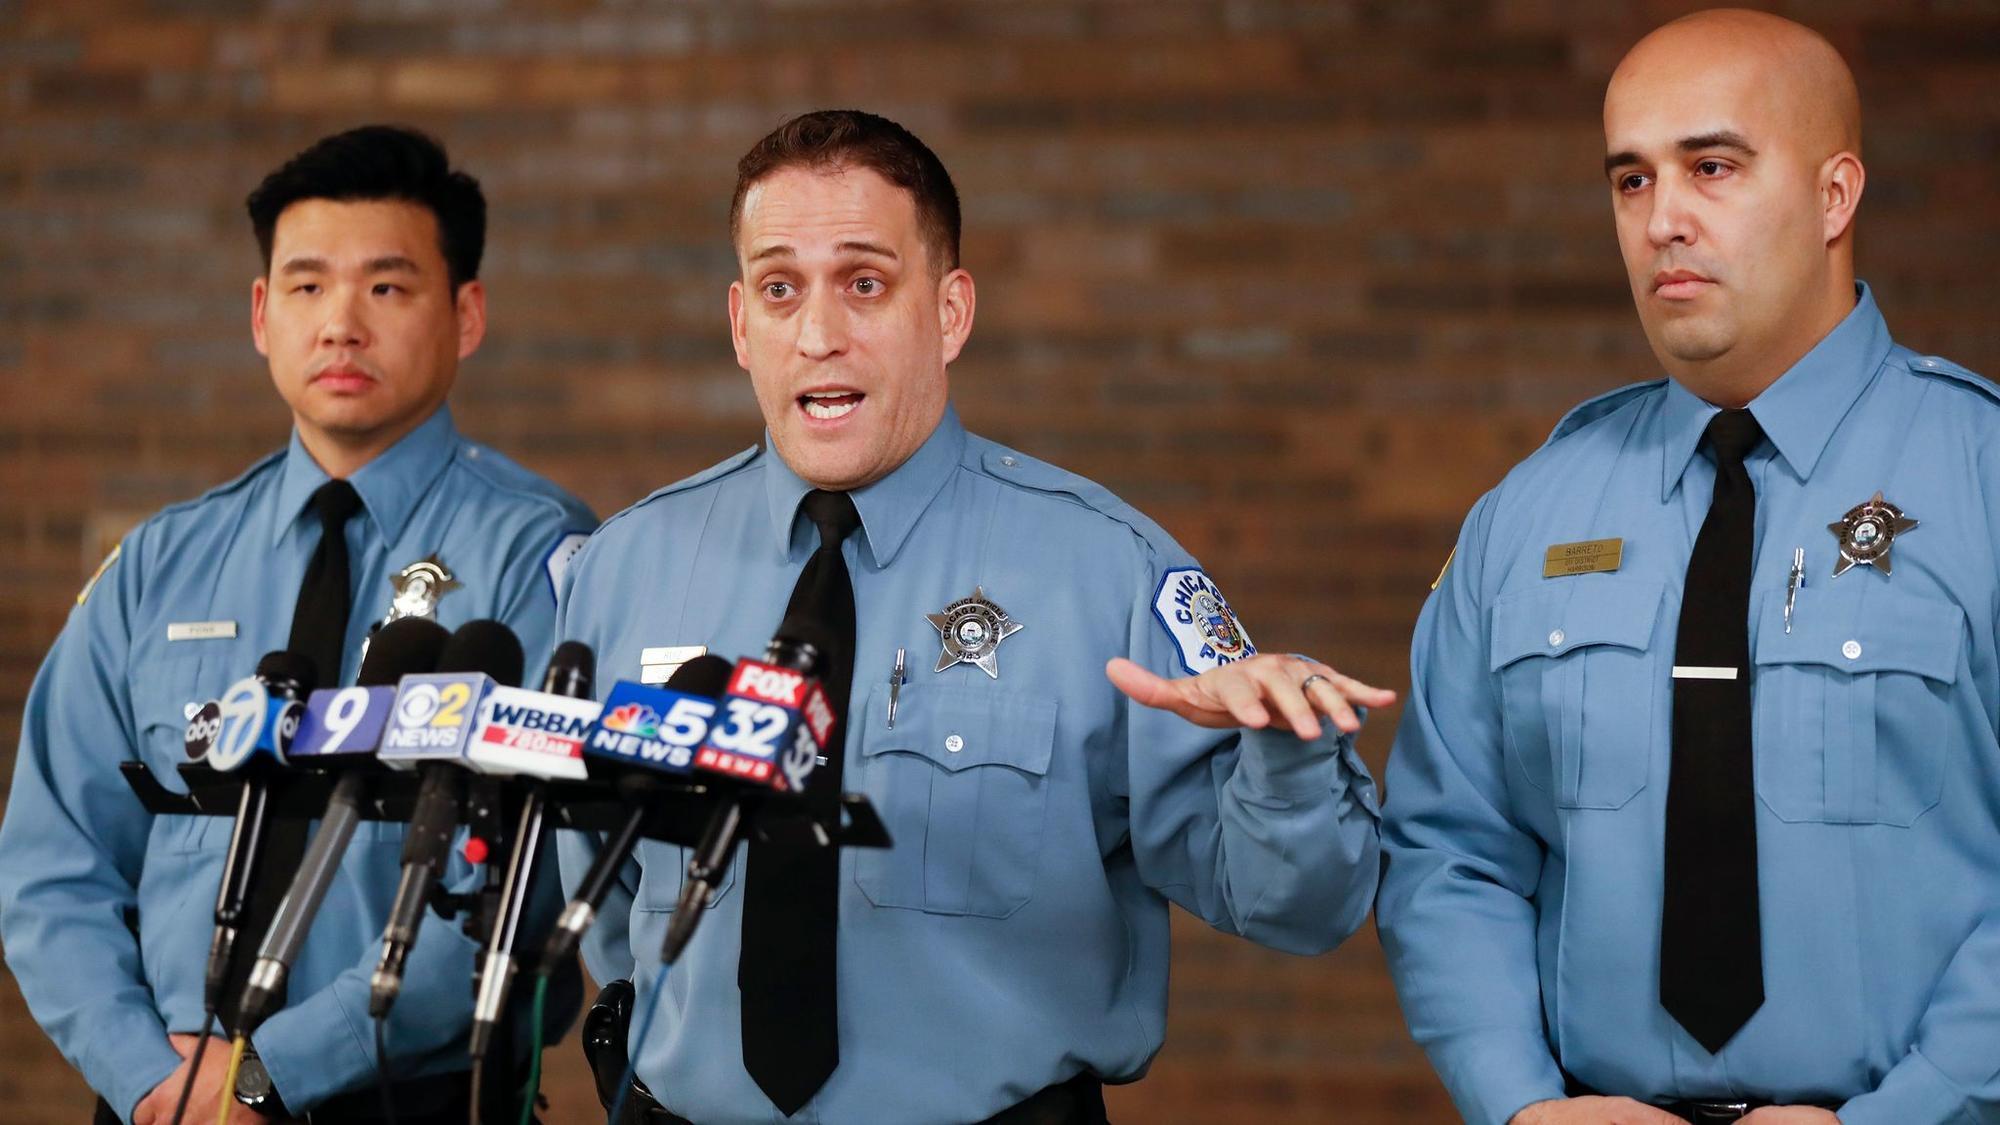 Chicago police officers rush into burning home: 'I could ...